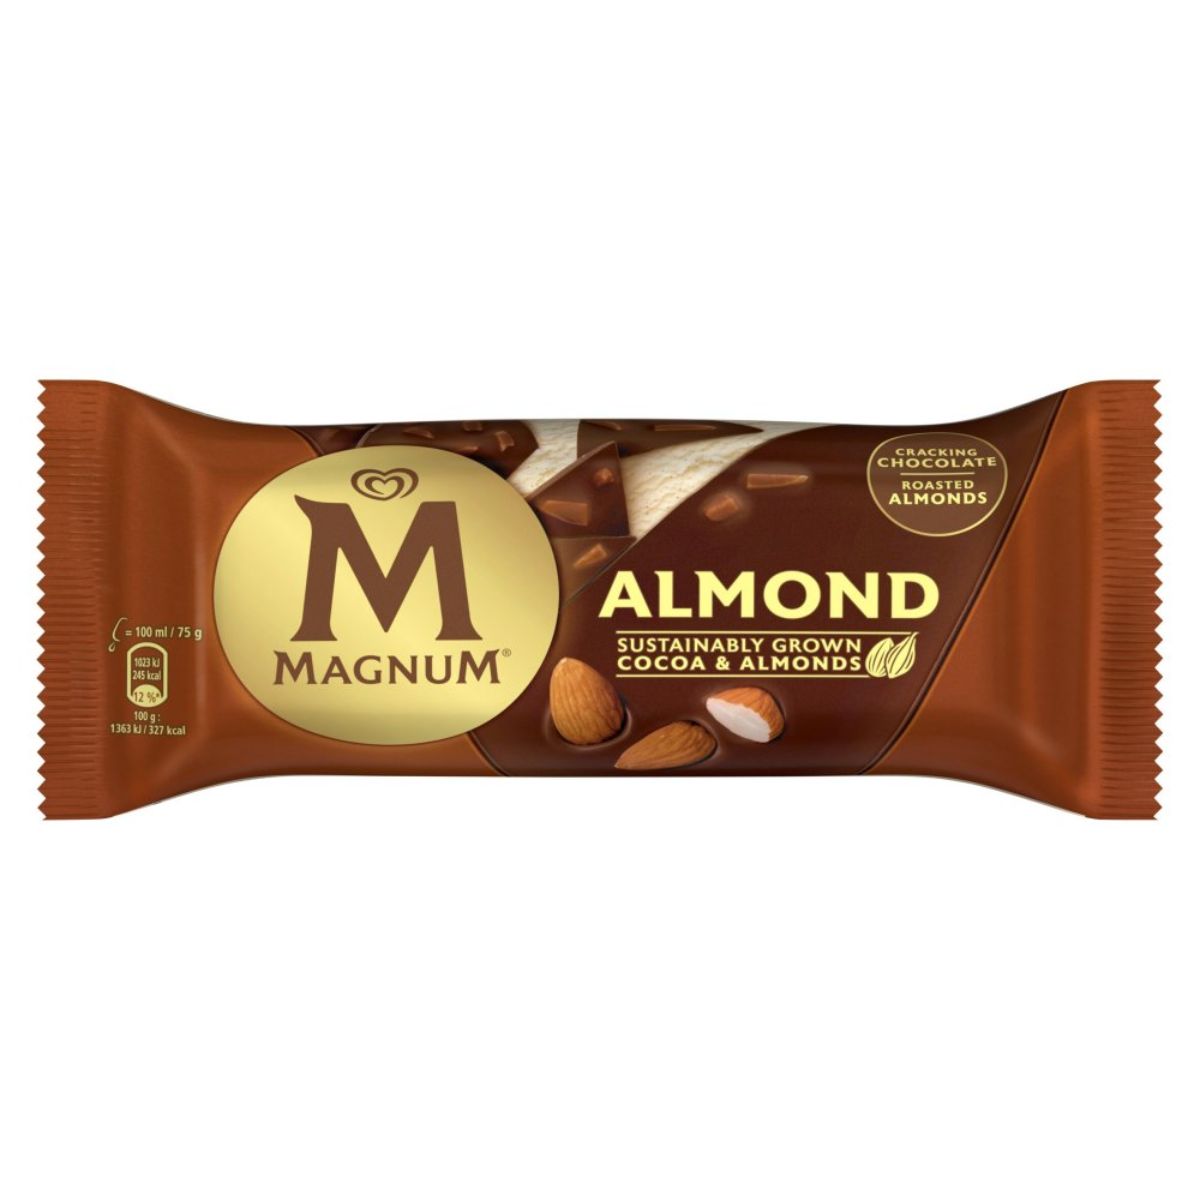 A Walls- Magnum Ice Cream Stick Almond - 100ml packaging featuring the logo and images of almonds and chocolate on a brown background.